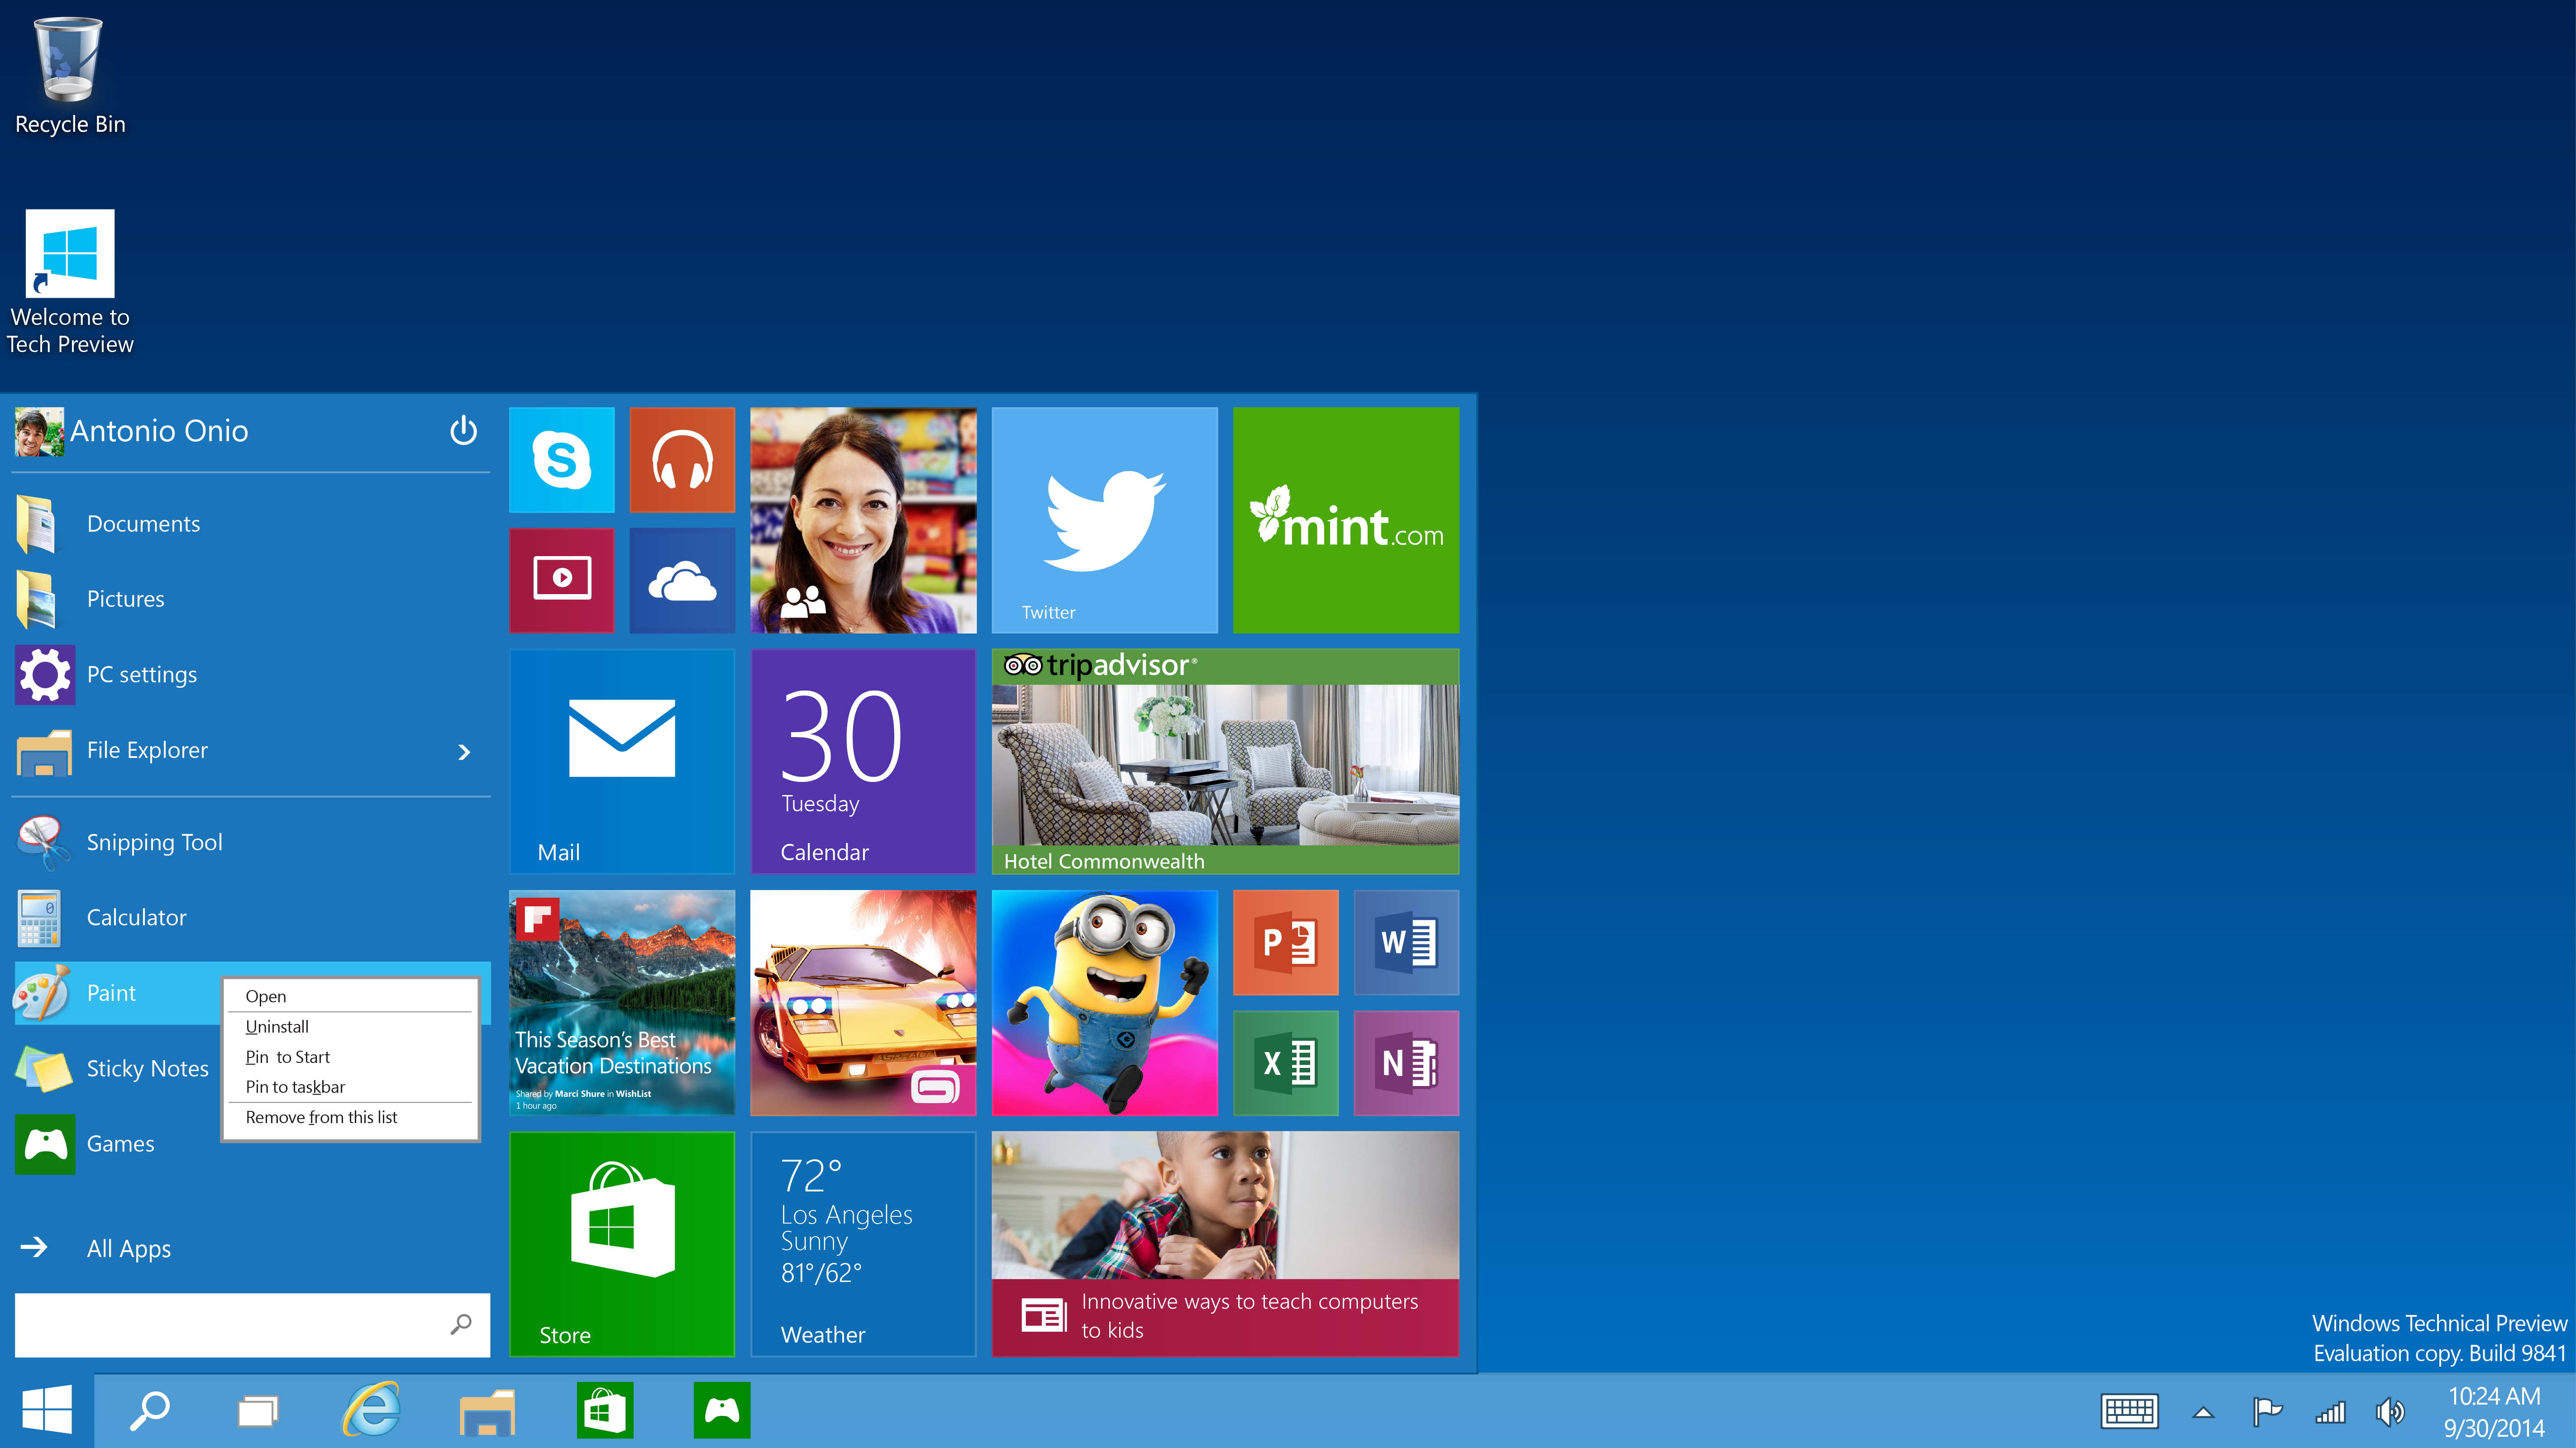 What Windows 10 editions will be there and for whom?